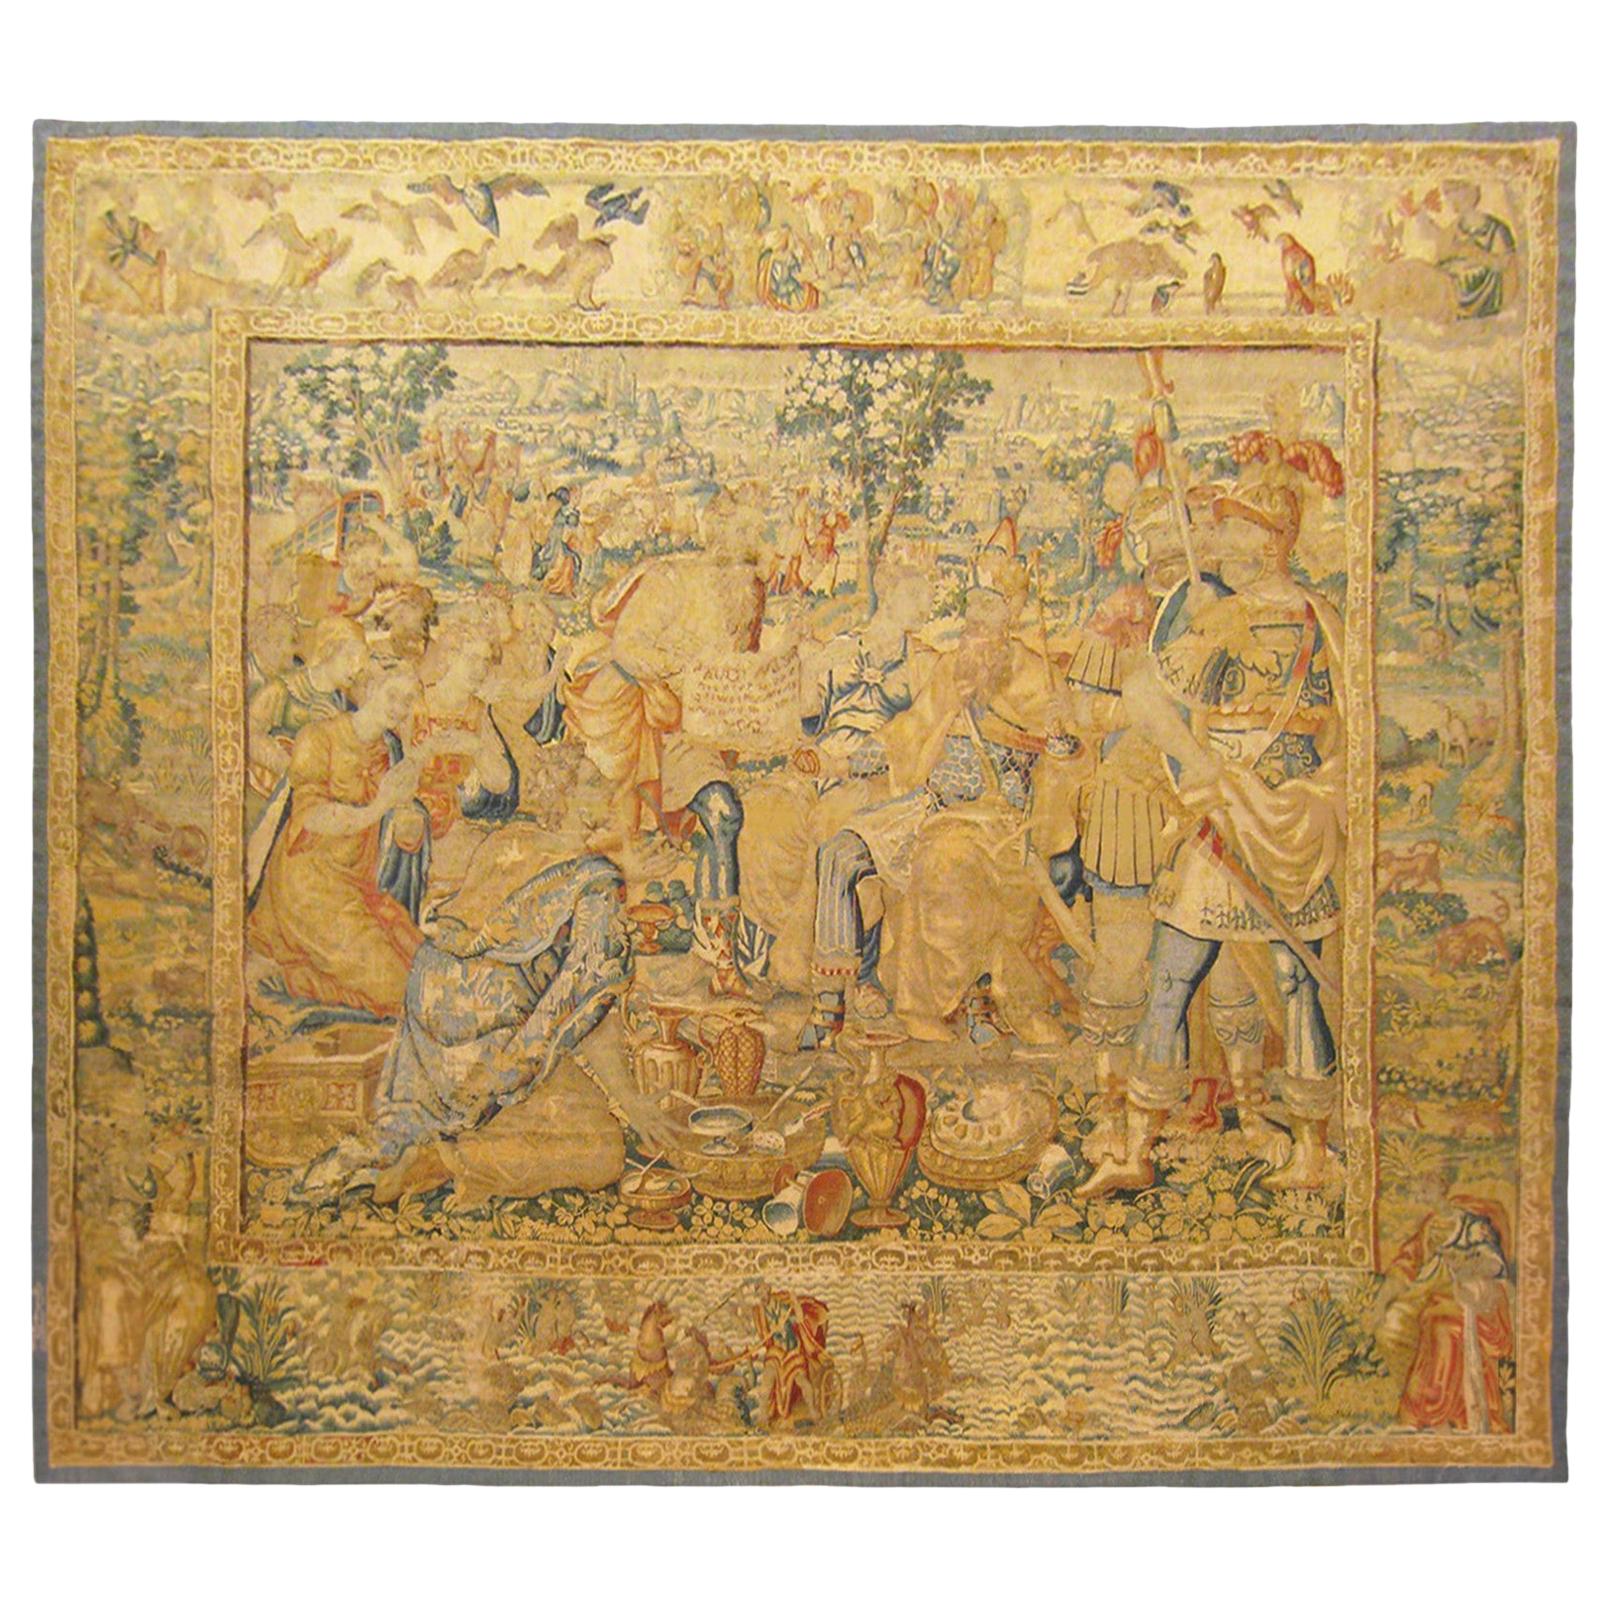 Late 16th Century Brussels Historical Tapestry, with Famed Roman General Scipio